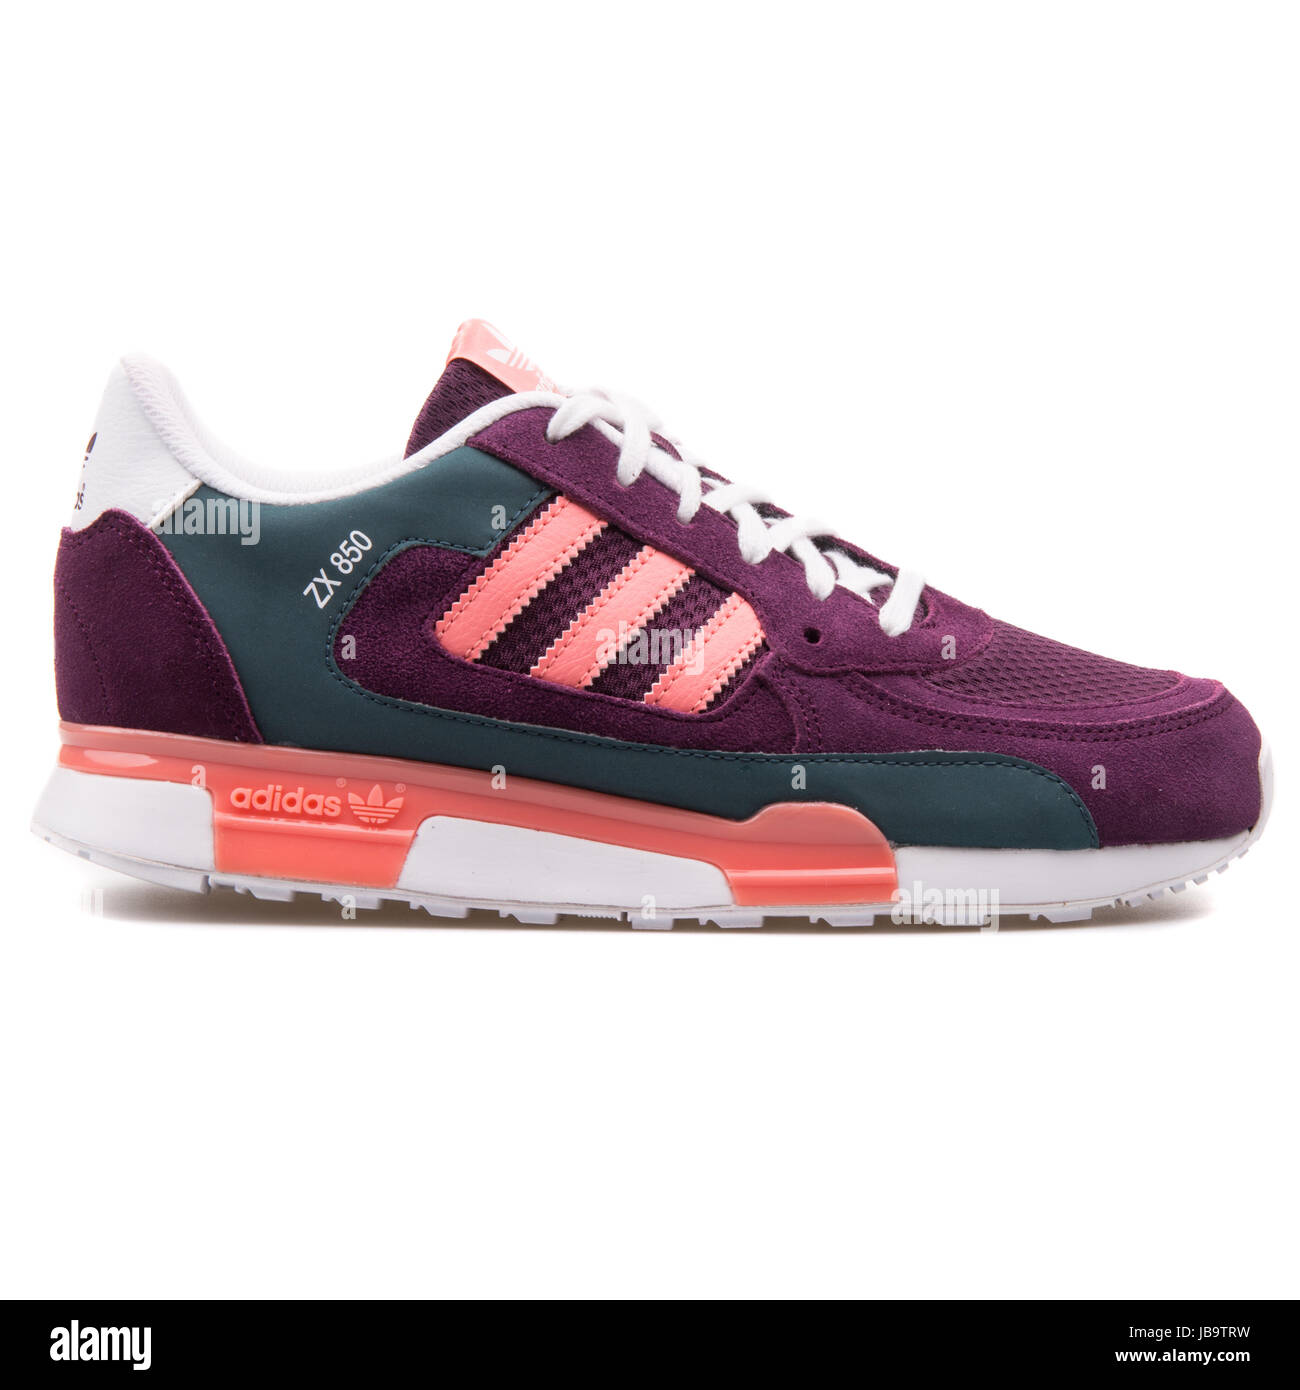 Adidas ZX 850 K Pink Youth's Sports Sneakers - Photo - Alamy